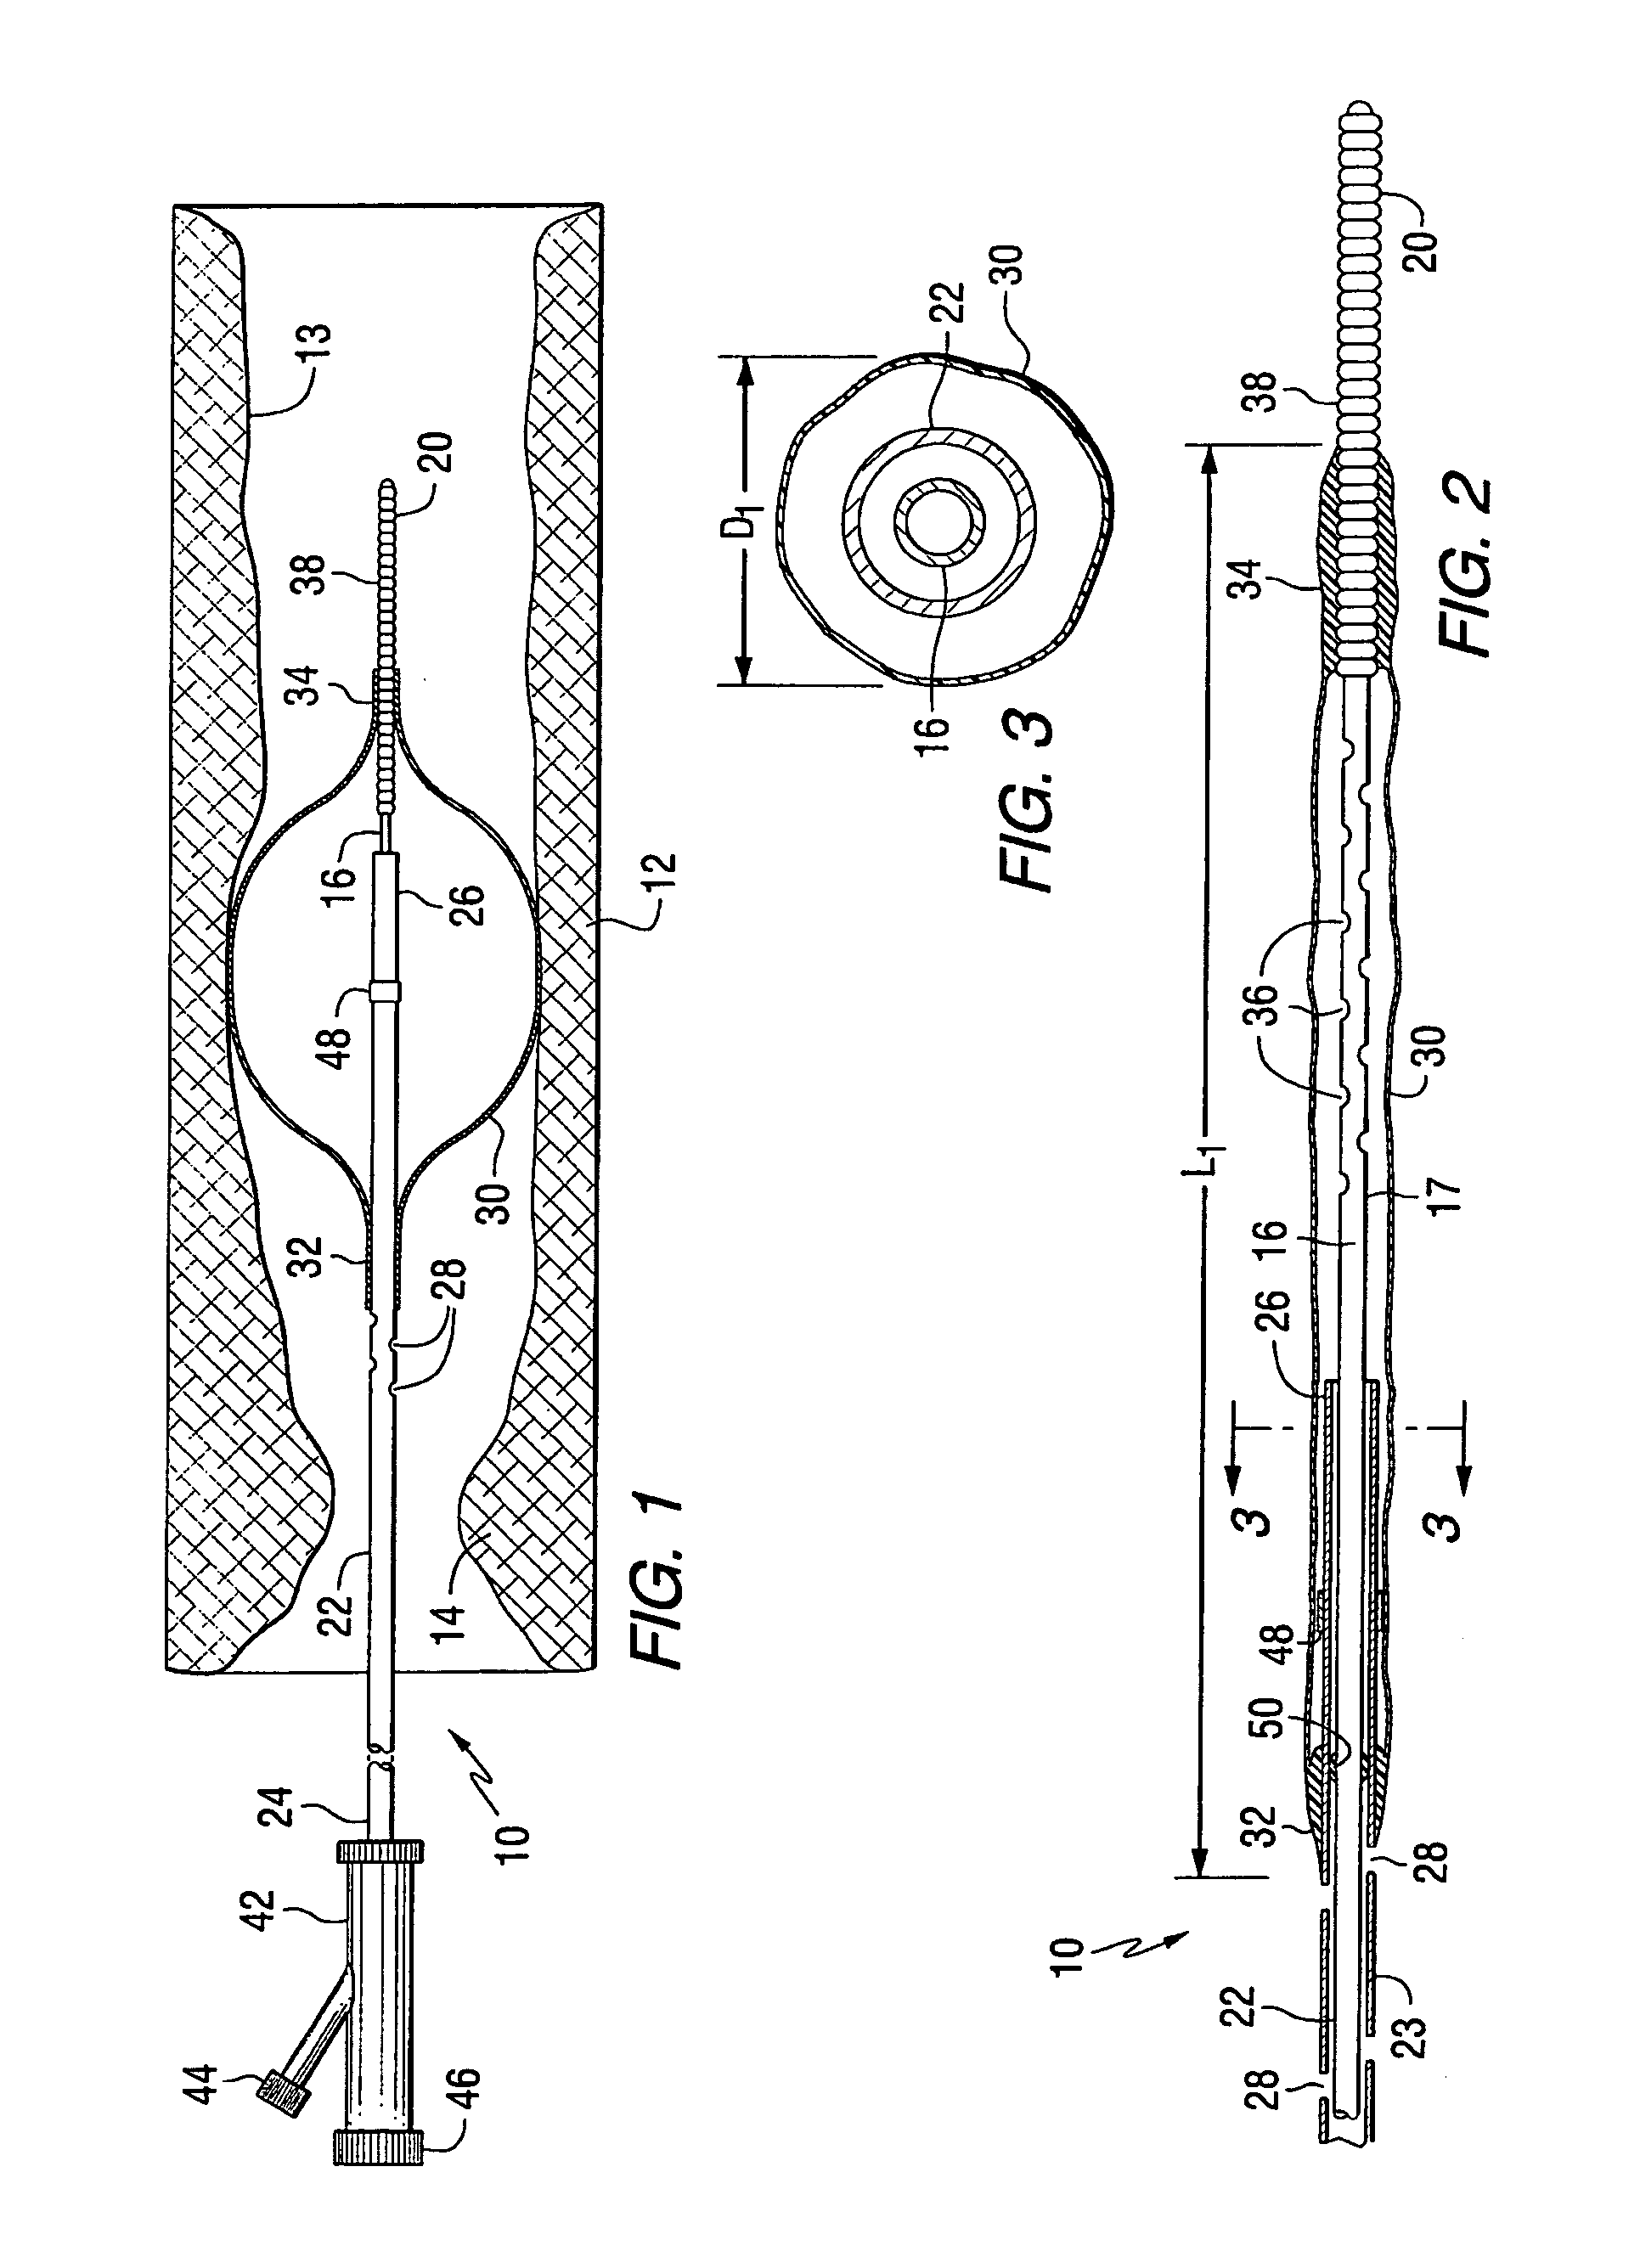 Apparatus for thromboembolic protection